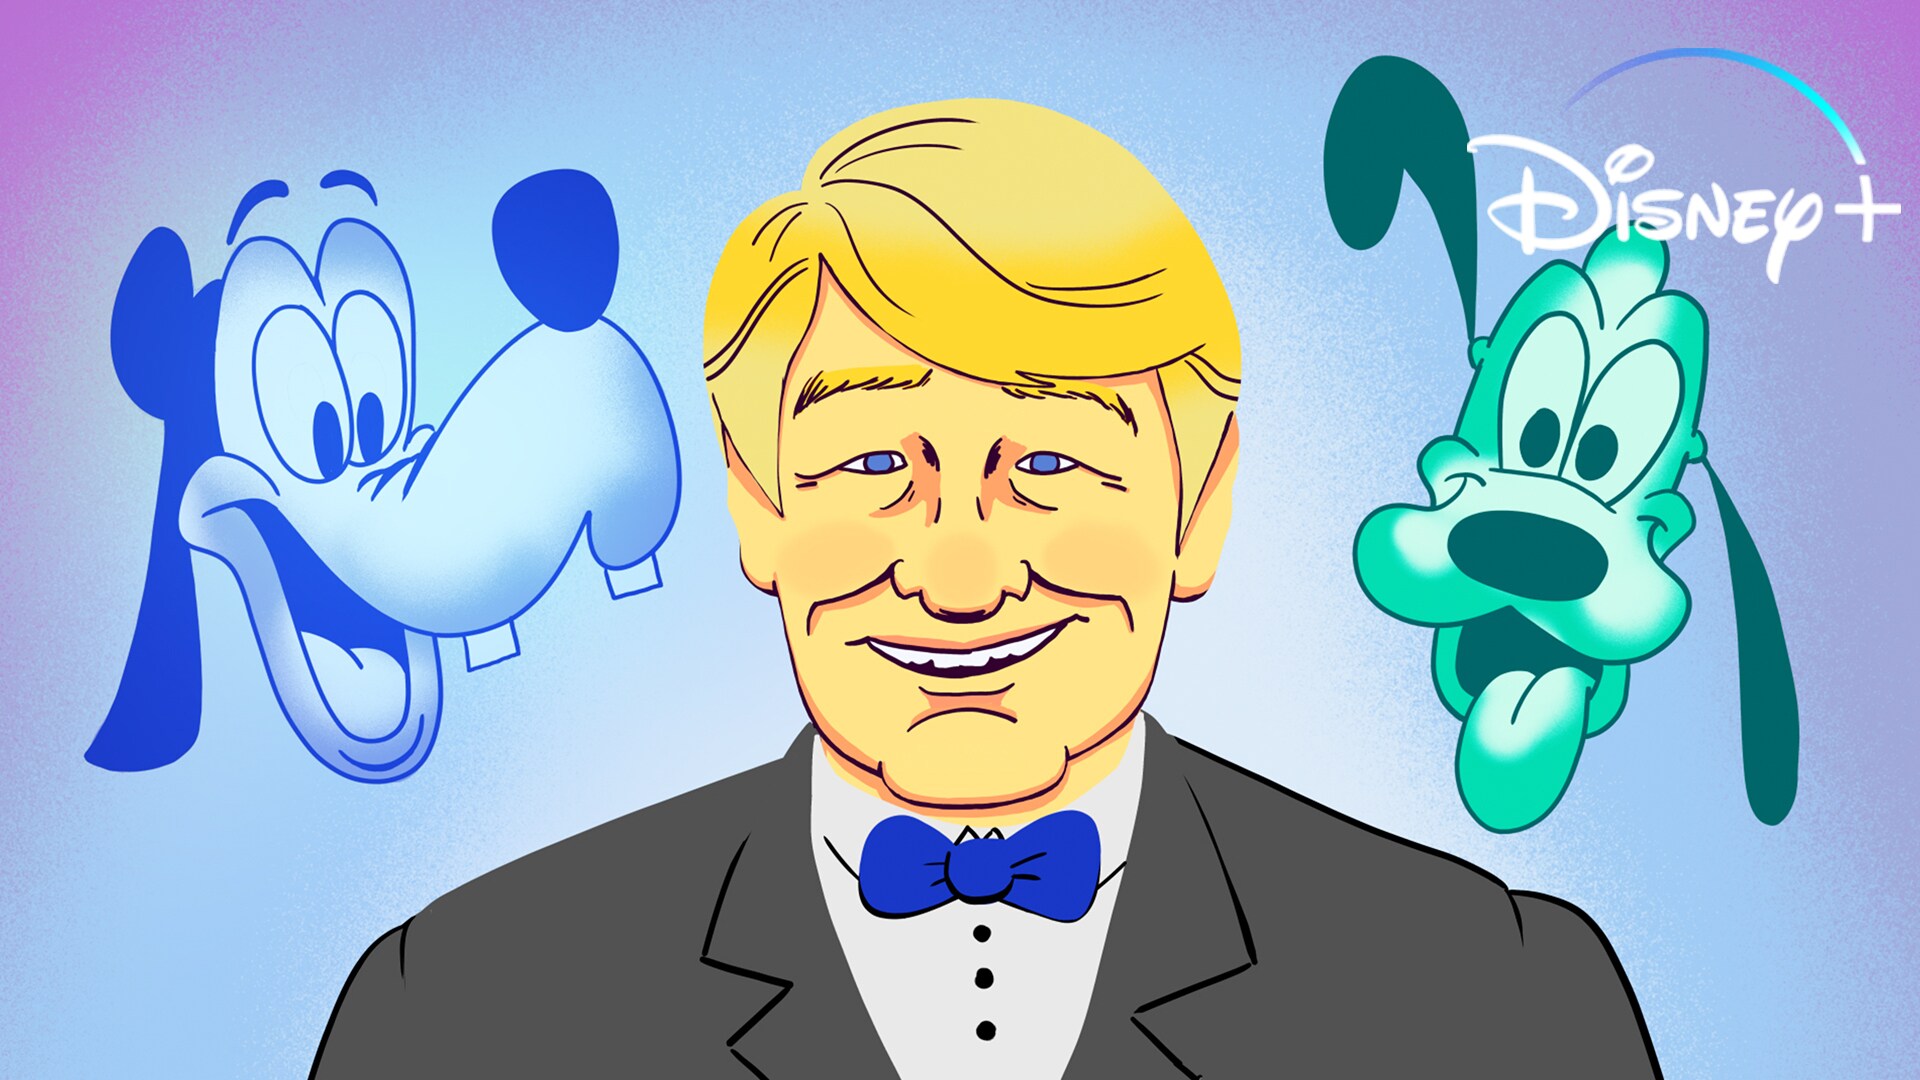 Bill Farmer on Voicing Goofy and It’s A Dog’s Life | Disney+ Draw Me A Story | Episode 1